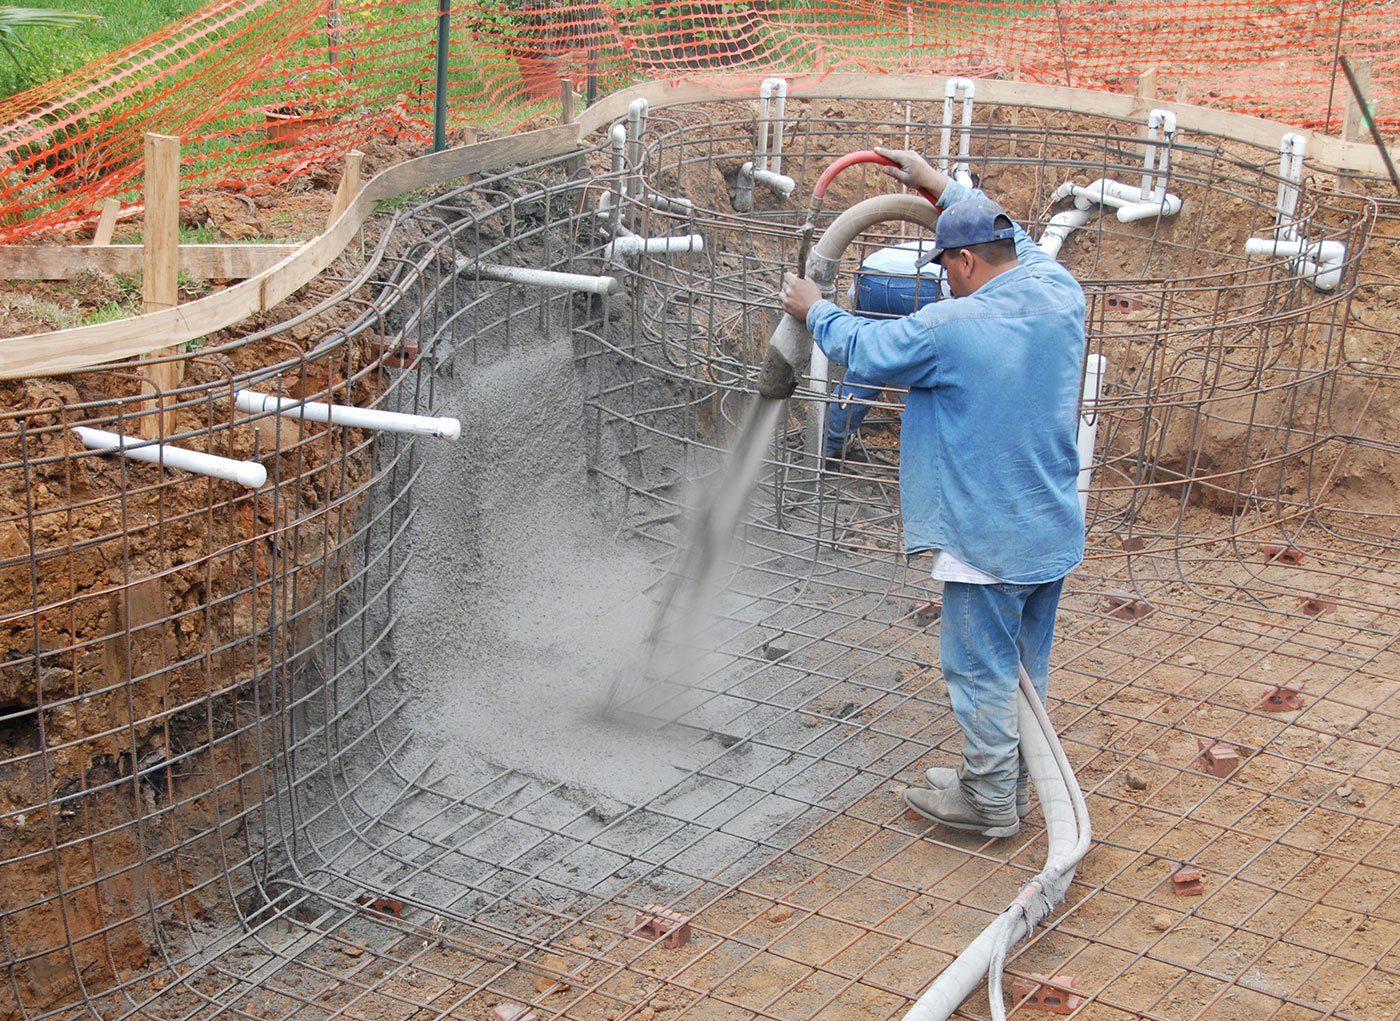 swimming pool construction worker pouring